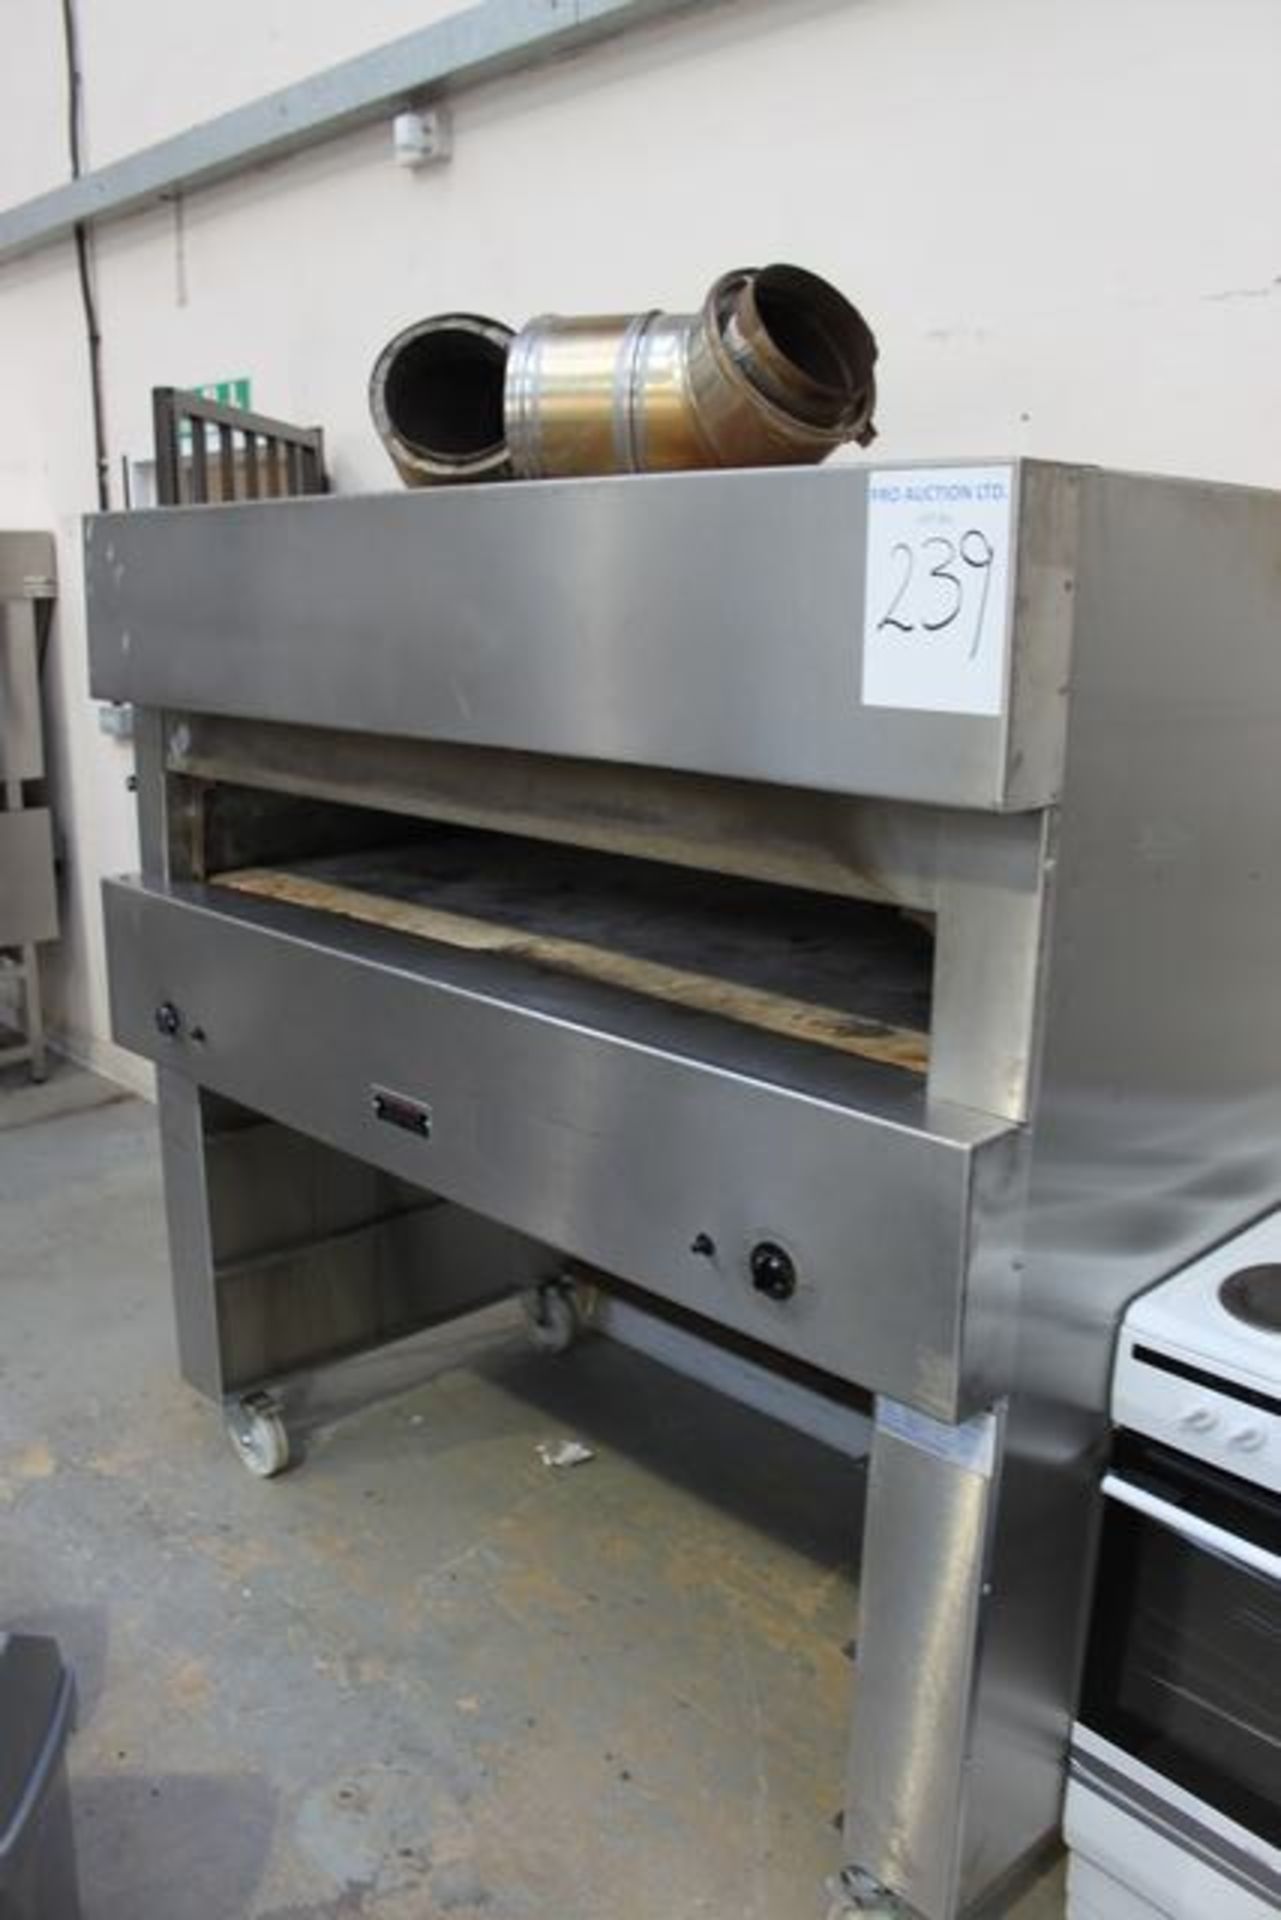 Clayburn 86-AS-488 gas pizza oven 1600mm x 200mm x 700mm deep temperature high Setting 26.5kw / 86,